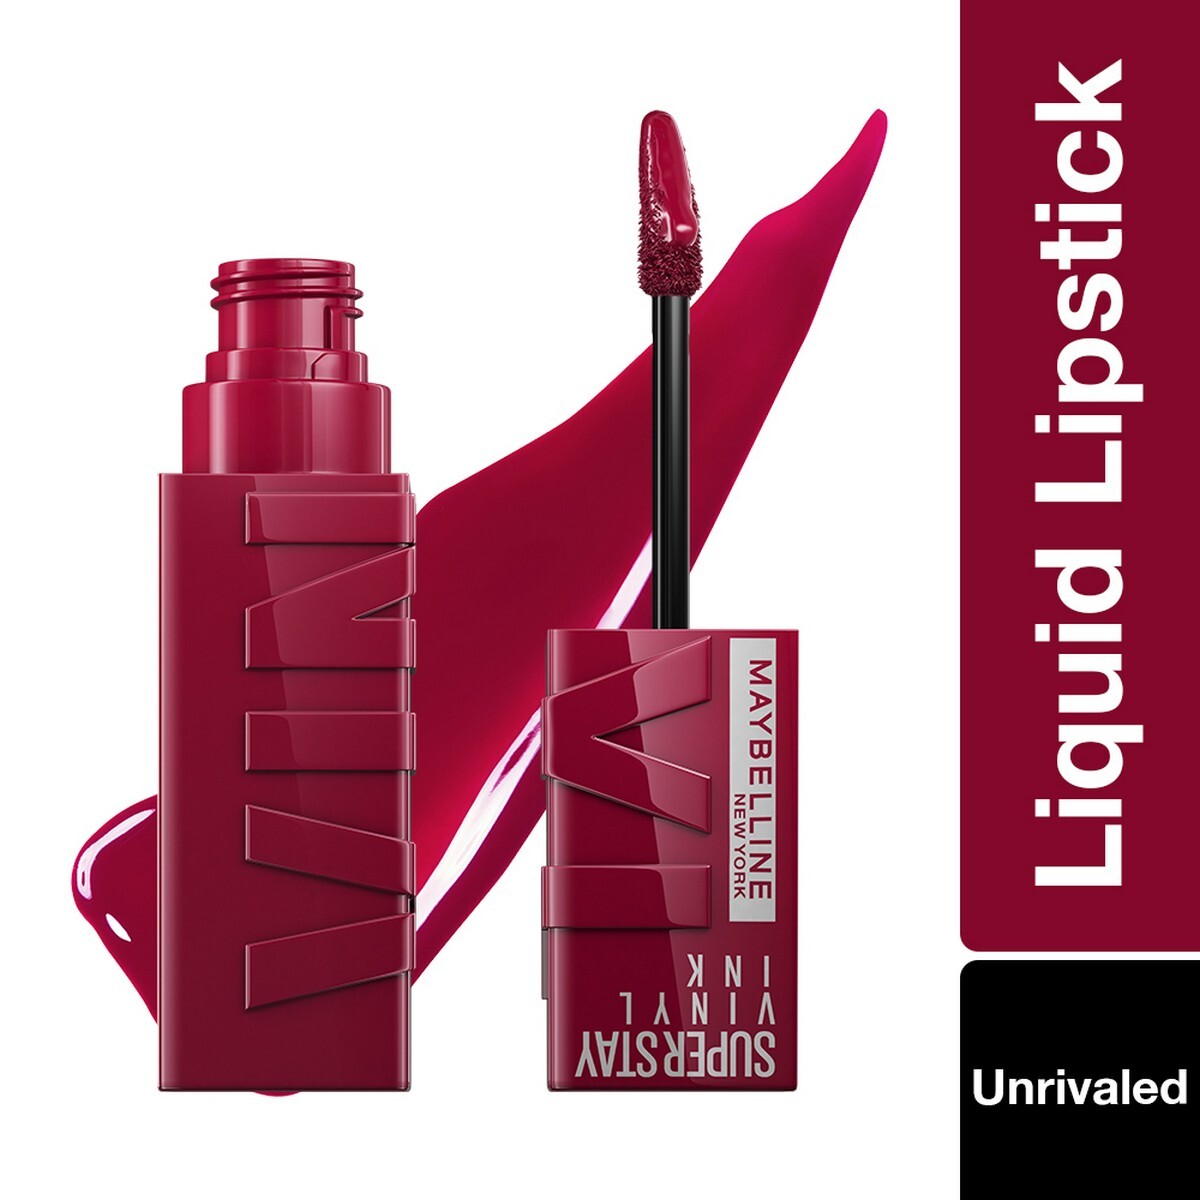 Maybelline Superstay Vinyl Ink Liquid Lipstick, Unrivaled , High Shine That Lasts for 16 HRs , Enriched With Vitamin E & Aloe